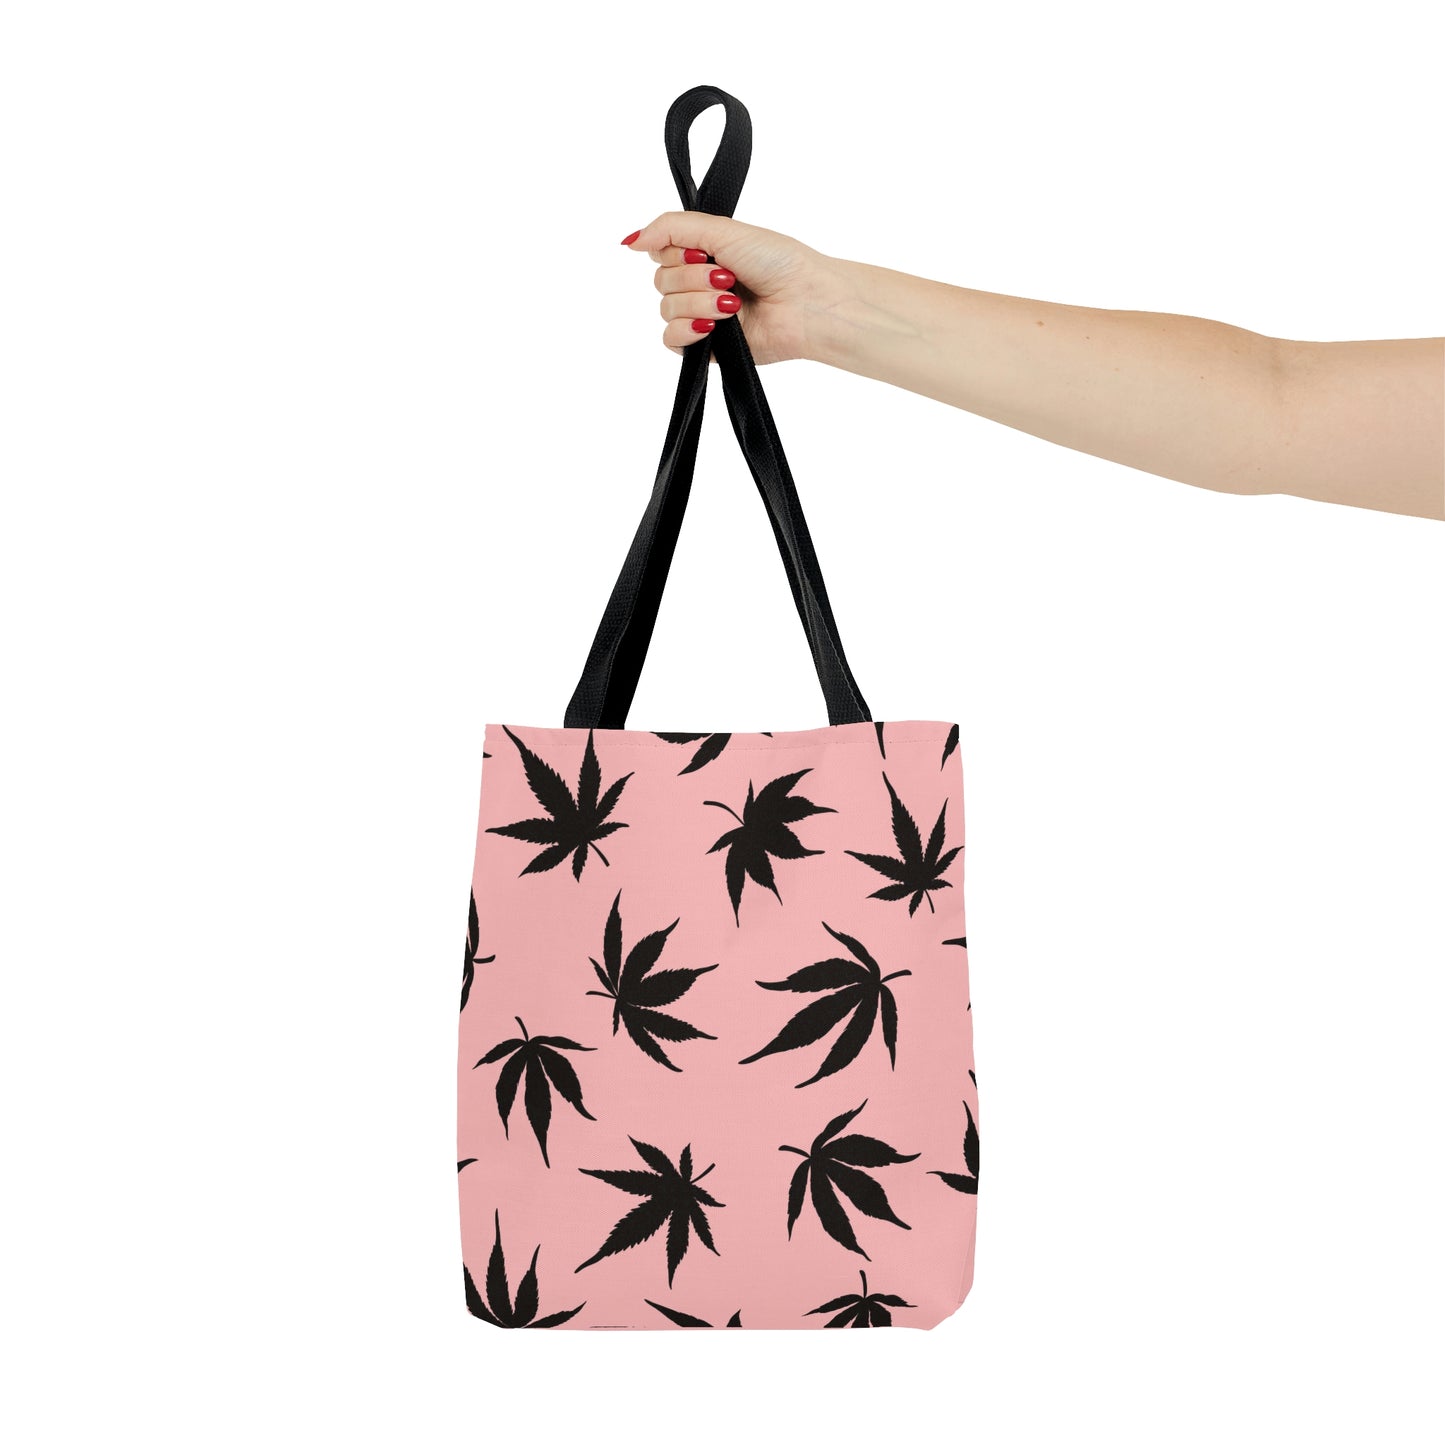 An outstretched hand shows how the Marijuana Leaves Pink Tote Bag stands alone  